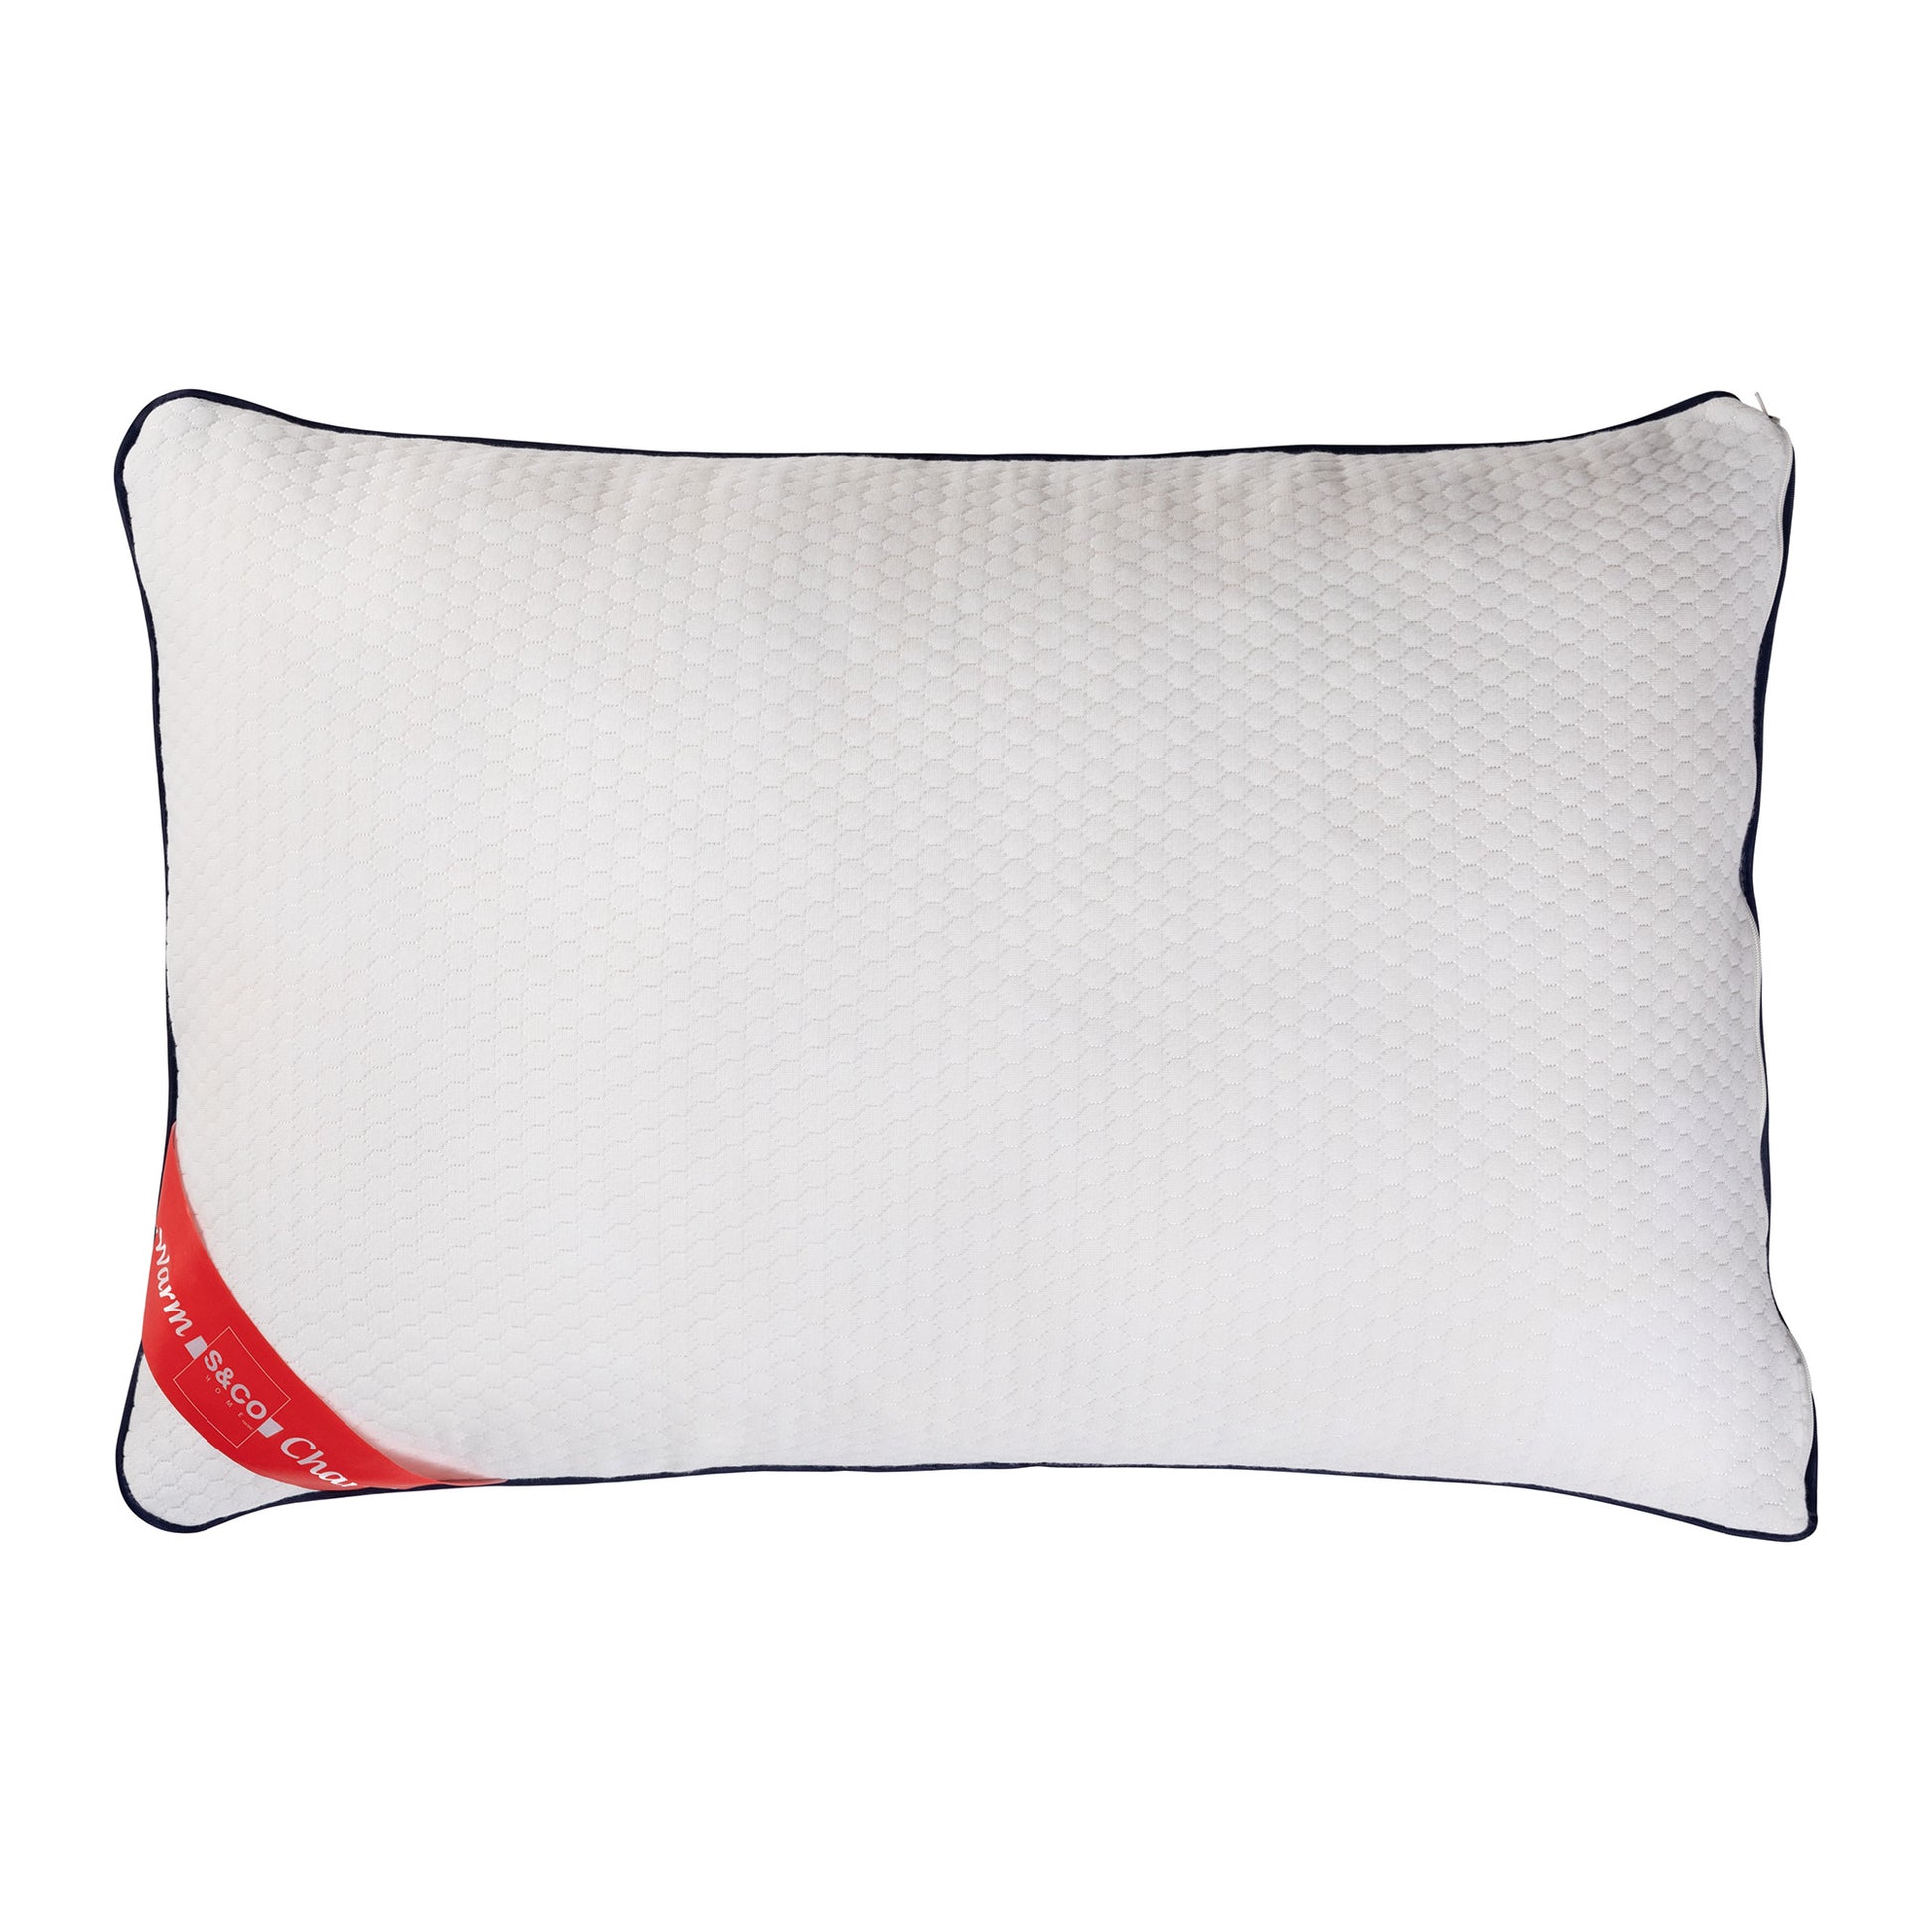 Cooling Matelasse Hotel Collection Bed Pillow, Queen Size. Designed for Back, Stomach or Side Sleepers, 20x30, White